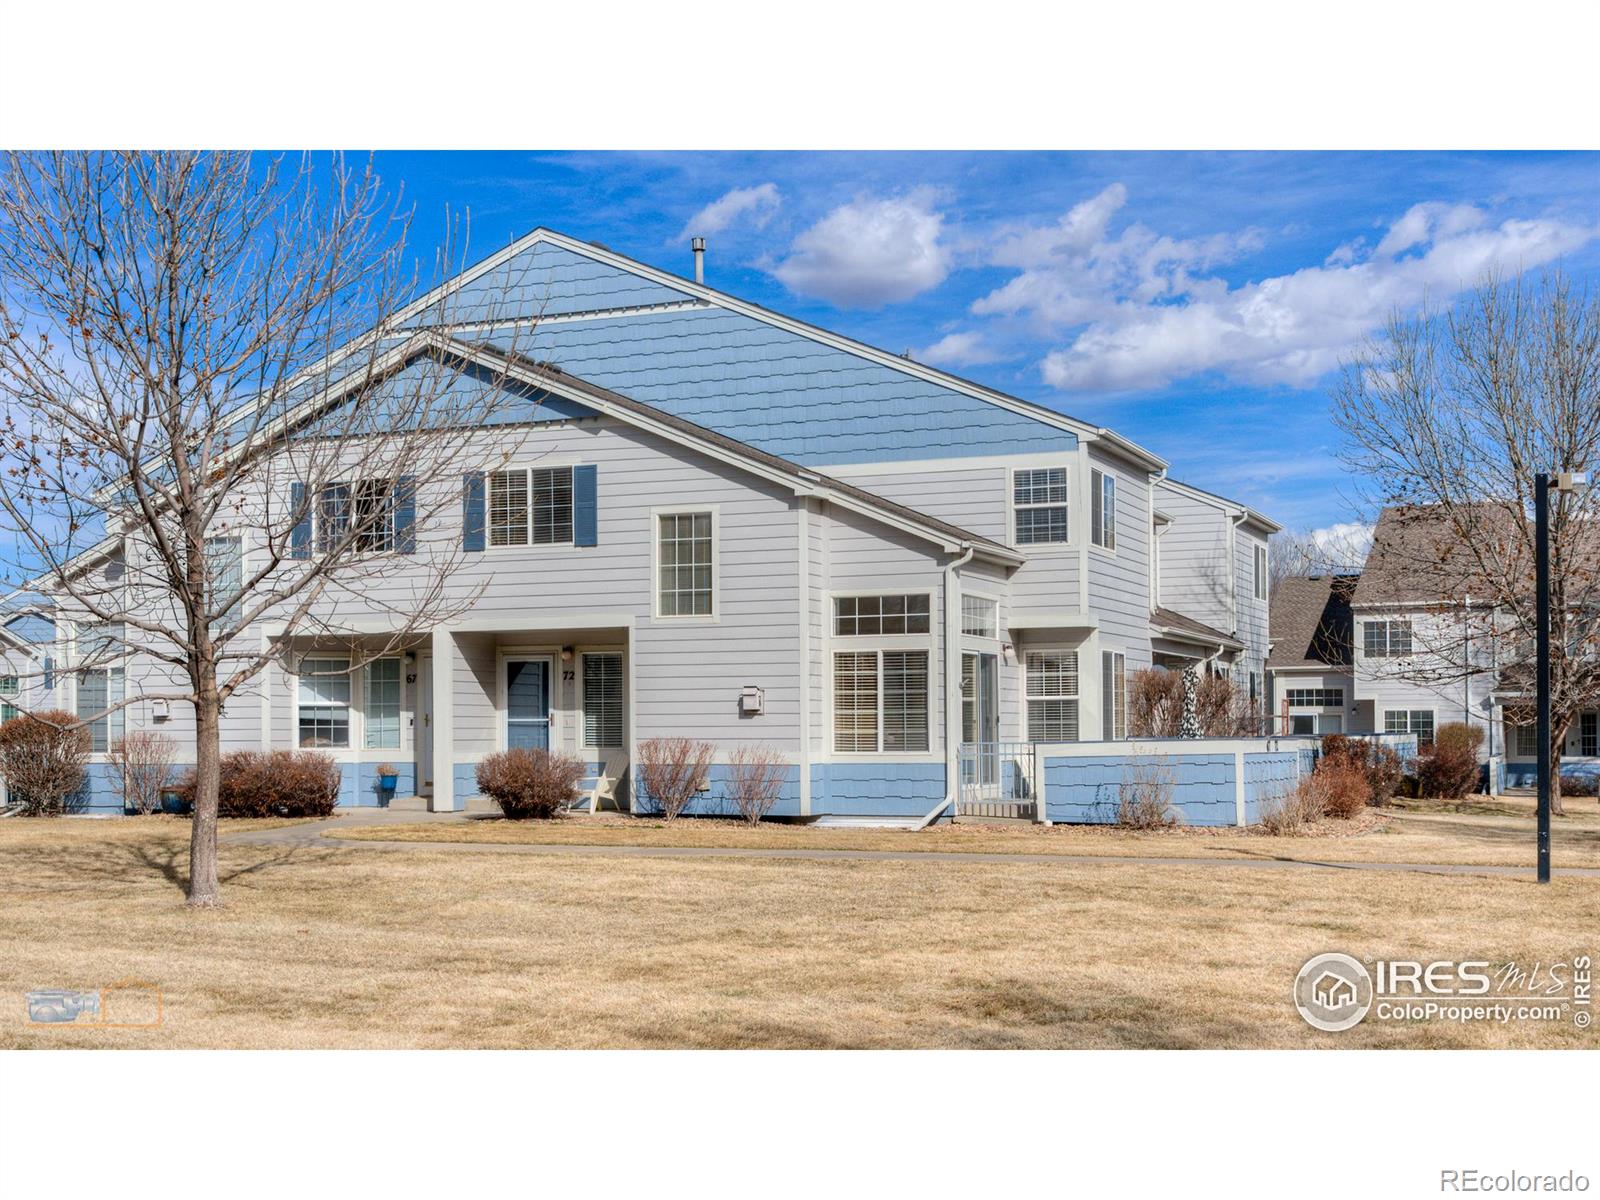 1419  Red Mountain Drive, longmont MLS: 4567891004688 Beds: 3 Baths: 3 Price: $399,900